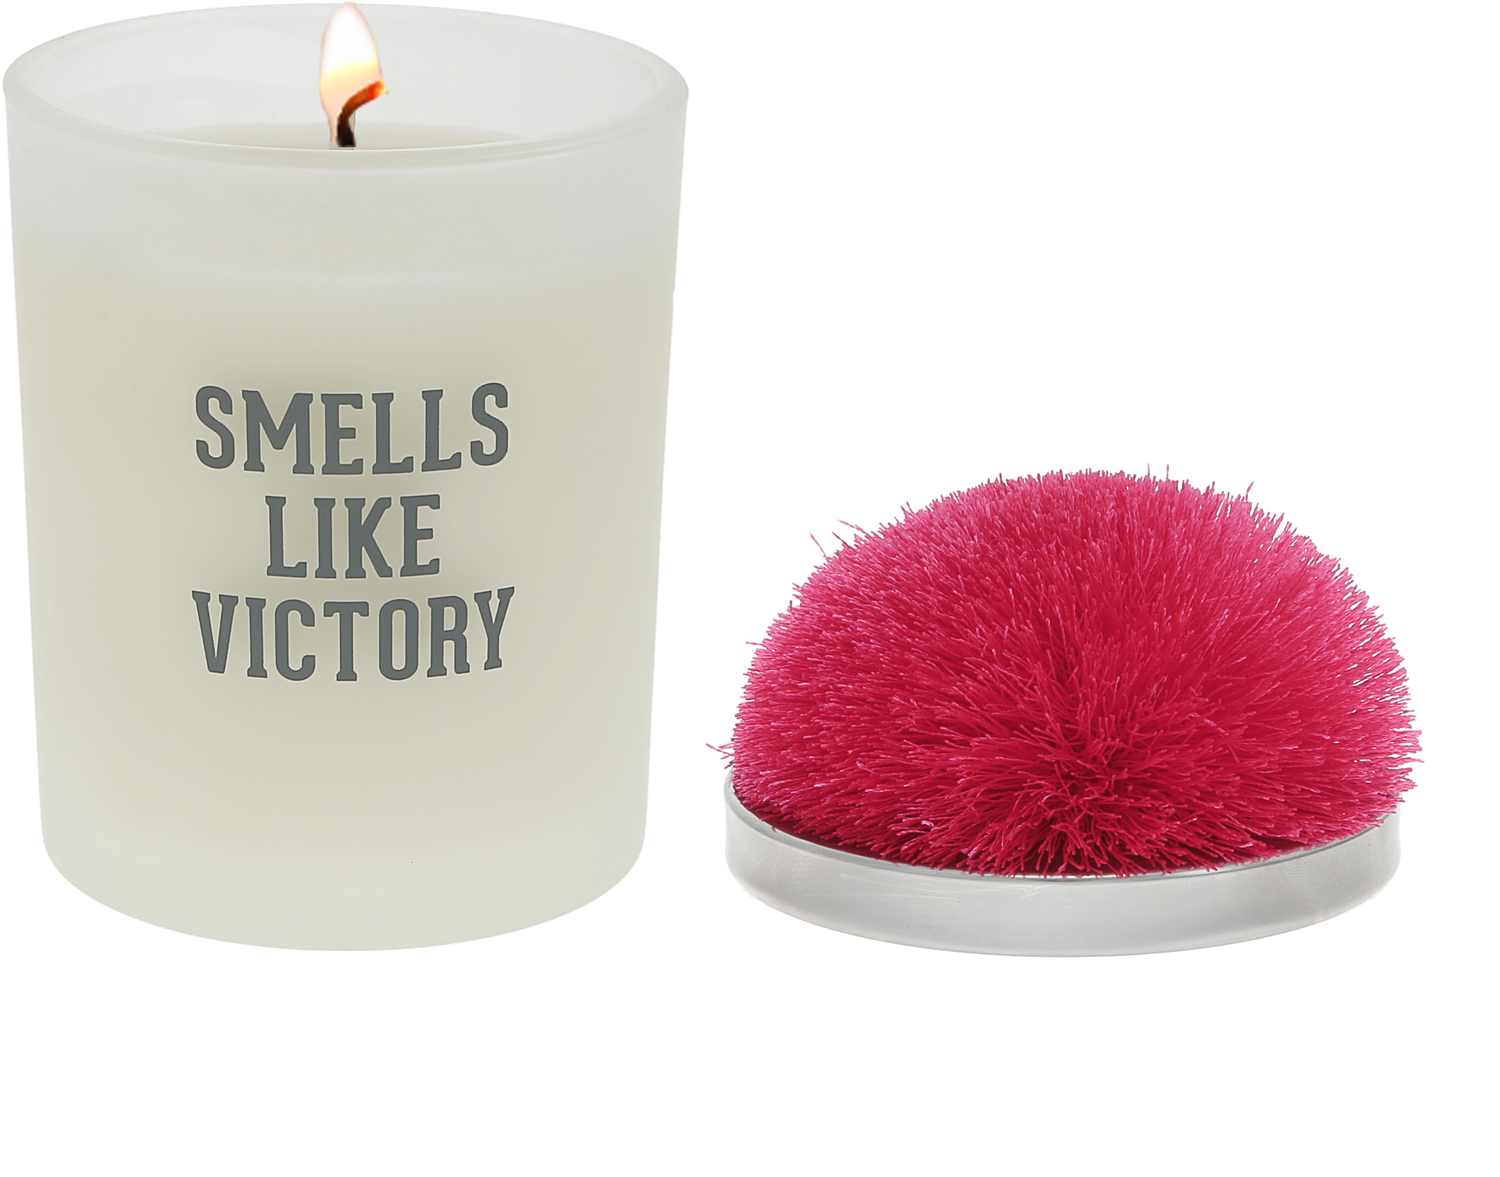 Victory - Hot Pink by Repre-Scent - Victory - Hot Pink - 5.5 oz - 100% Soy Wax Candle with Pom Pom Lid
Scent: Tranquility